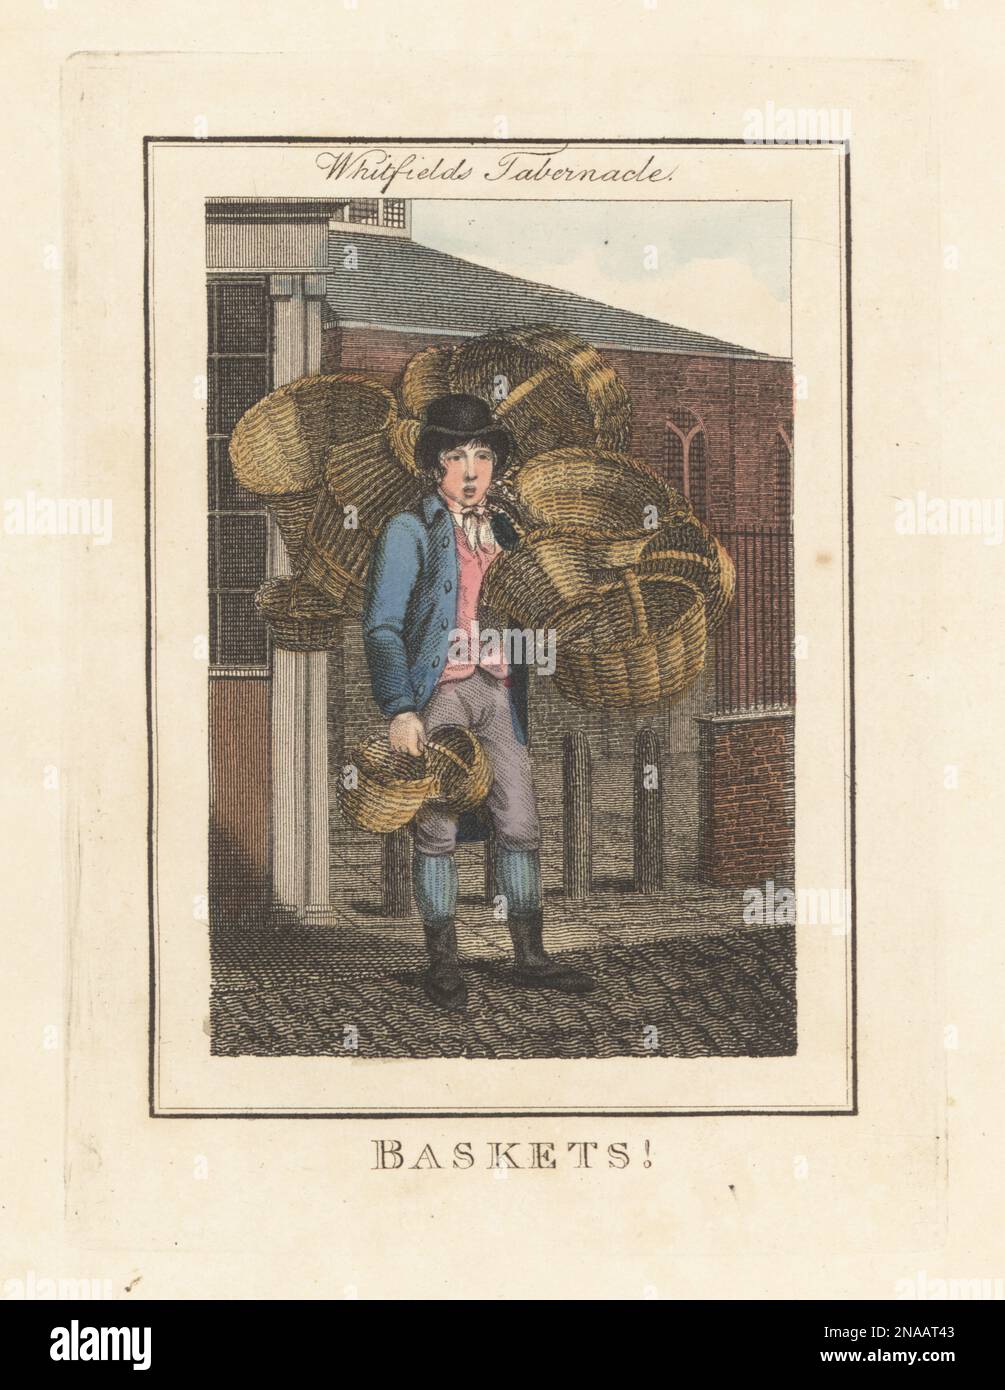 Basket seller in front of Whitfields Tabernacle, London, 1805. Basket weaver in top hat, coat, waistcoat, breeches and boots, with stock of rush and willow baskets. Moorfields Tabernacle was erected by evangelical preacher George Whitefield. Handcoloured copperplate engraving by Edward Edwards after an illustration by William Marshall Craig from Description of the Plates Representing the Itinerant Traders of London, Richard Phillips, No. 71 St Paul’s Churchyard, London, 1805. Stock Photo